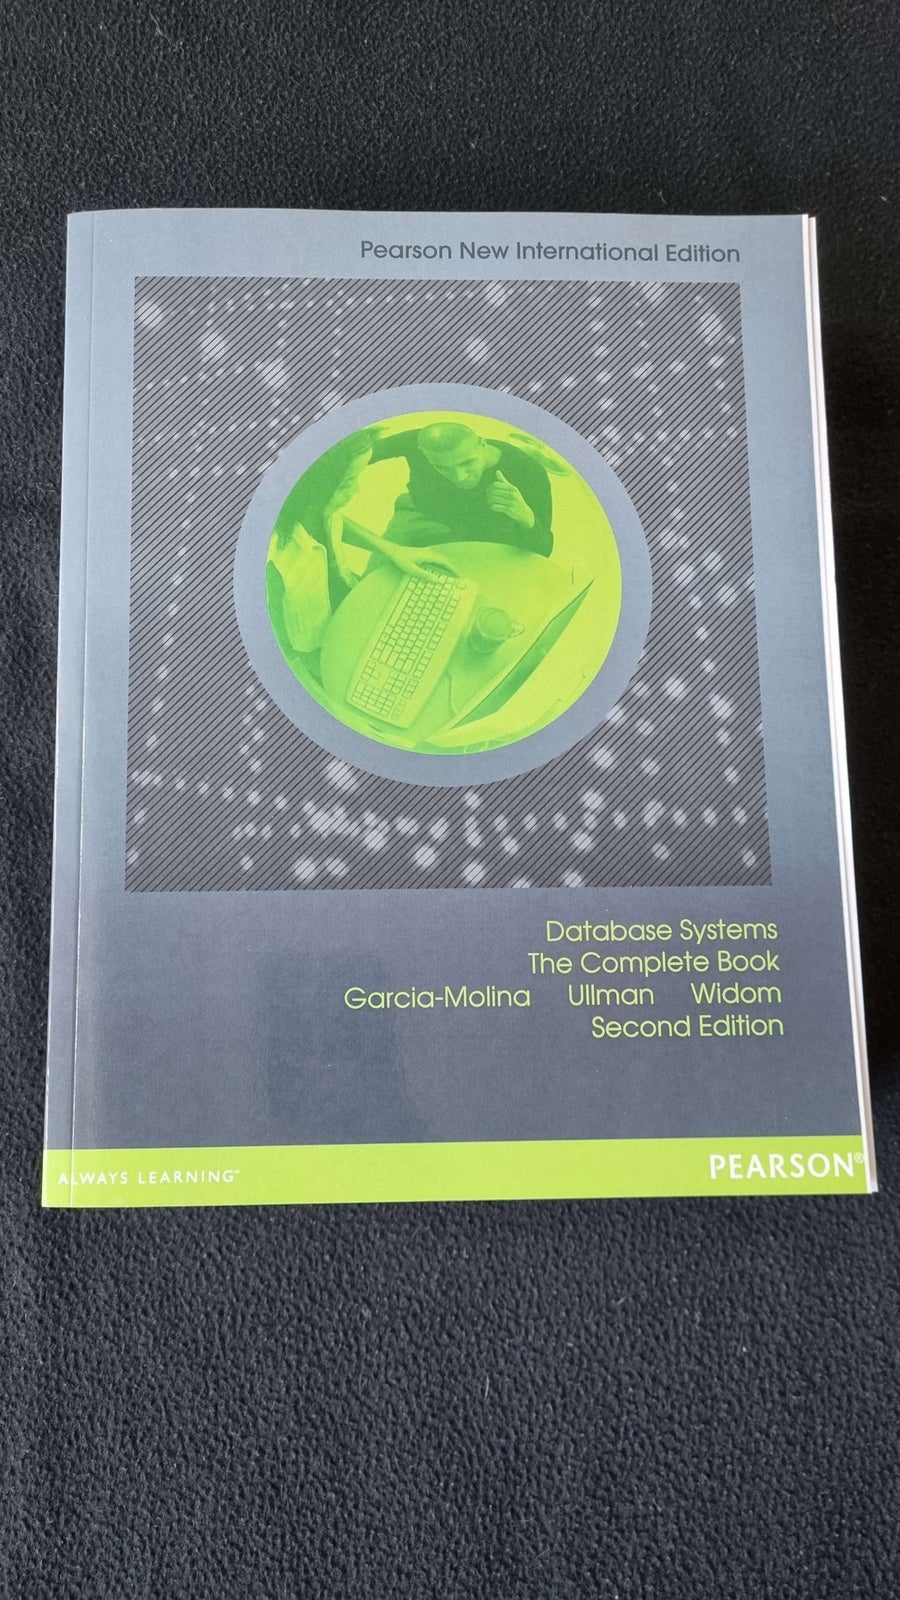 Database Systems - The Complete Book, Hector